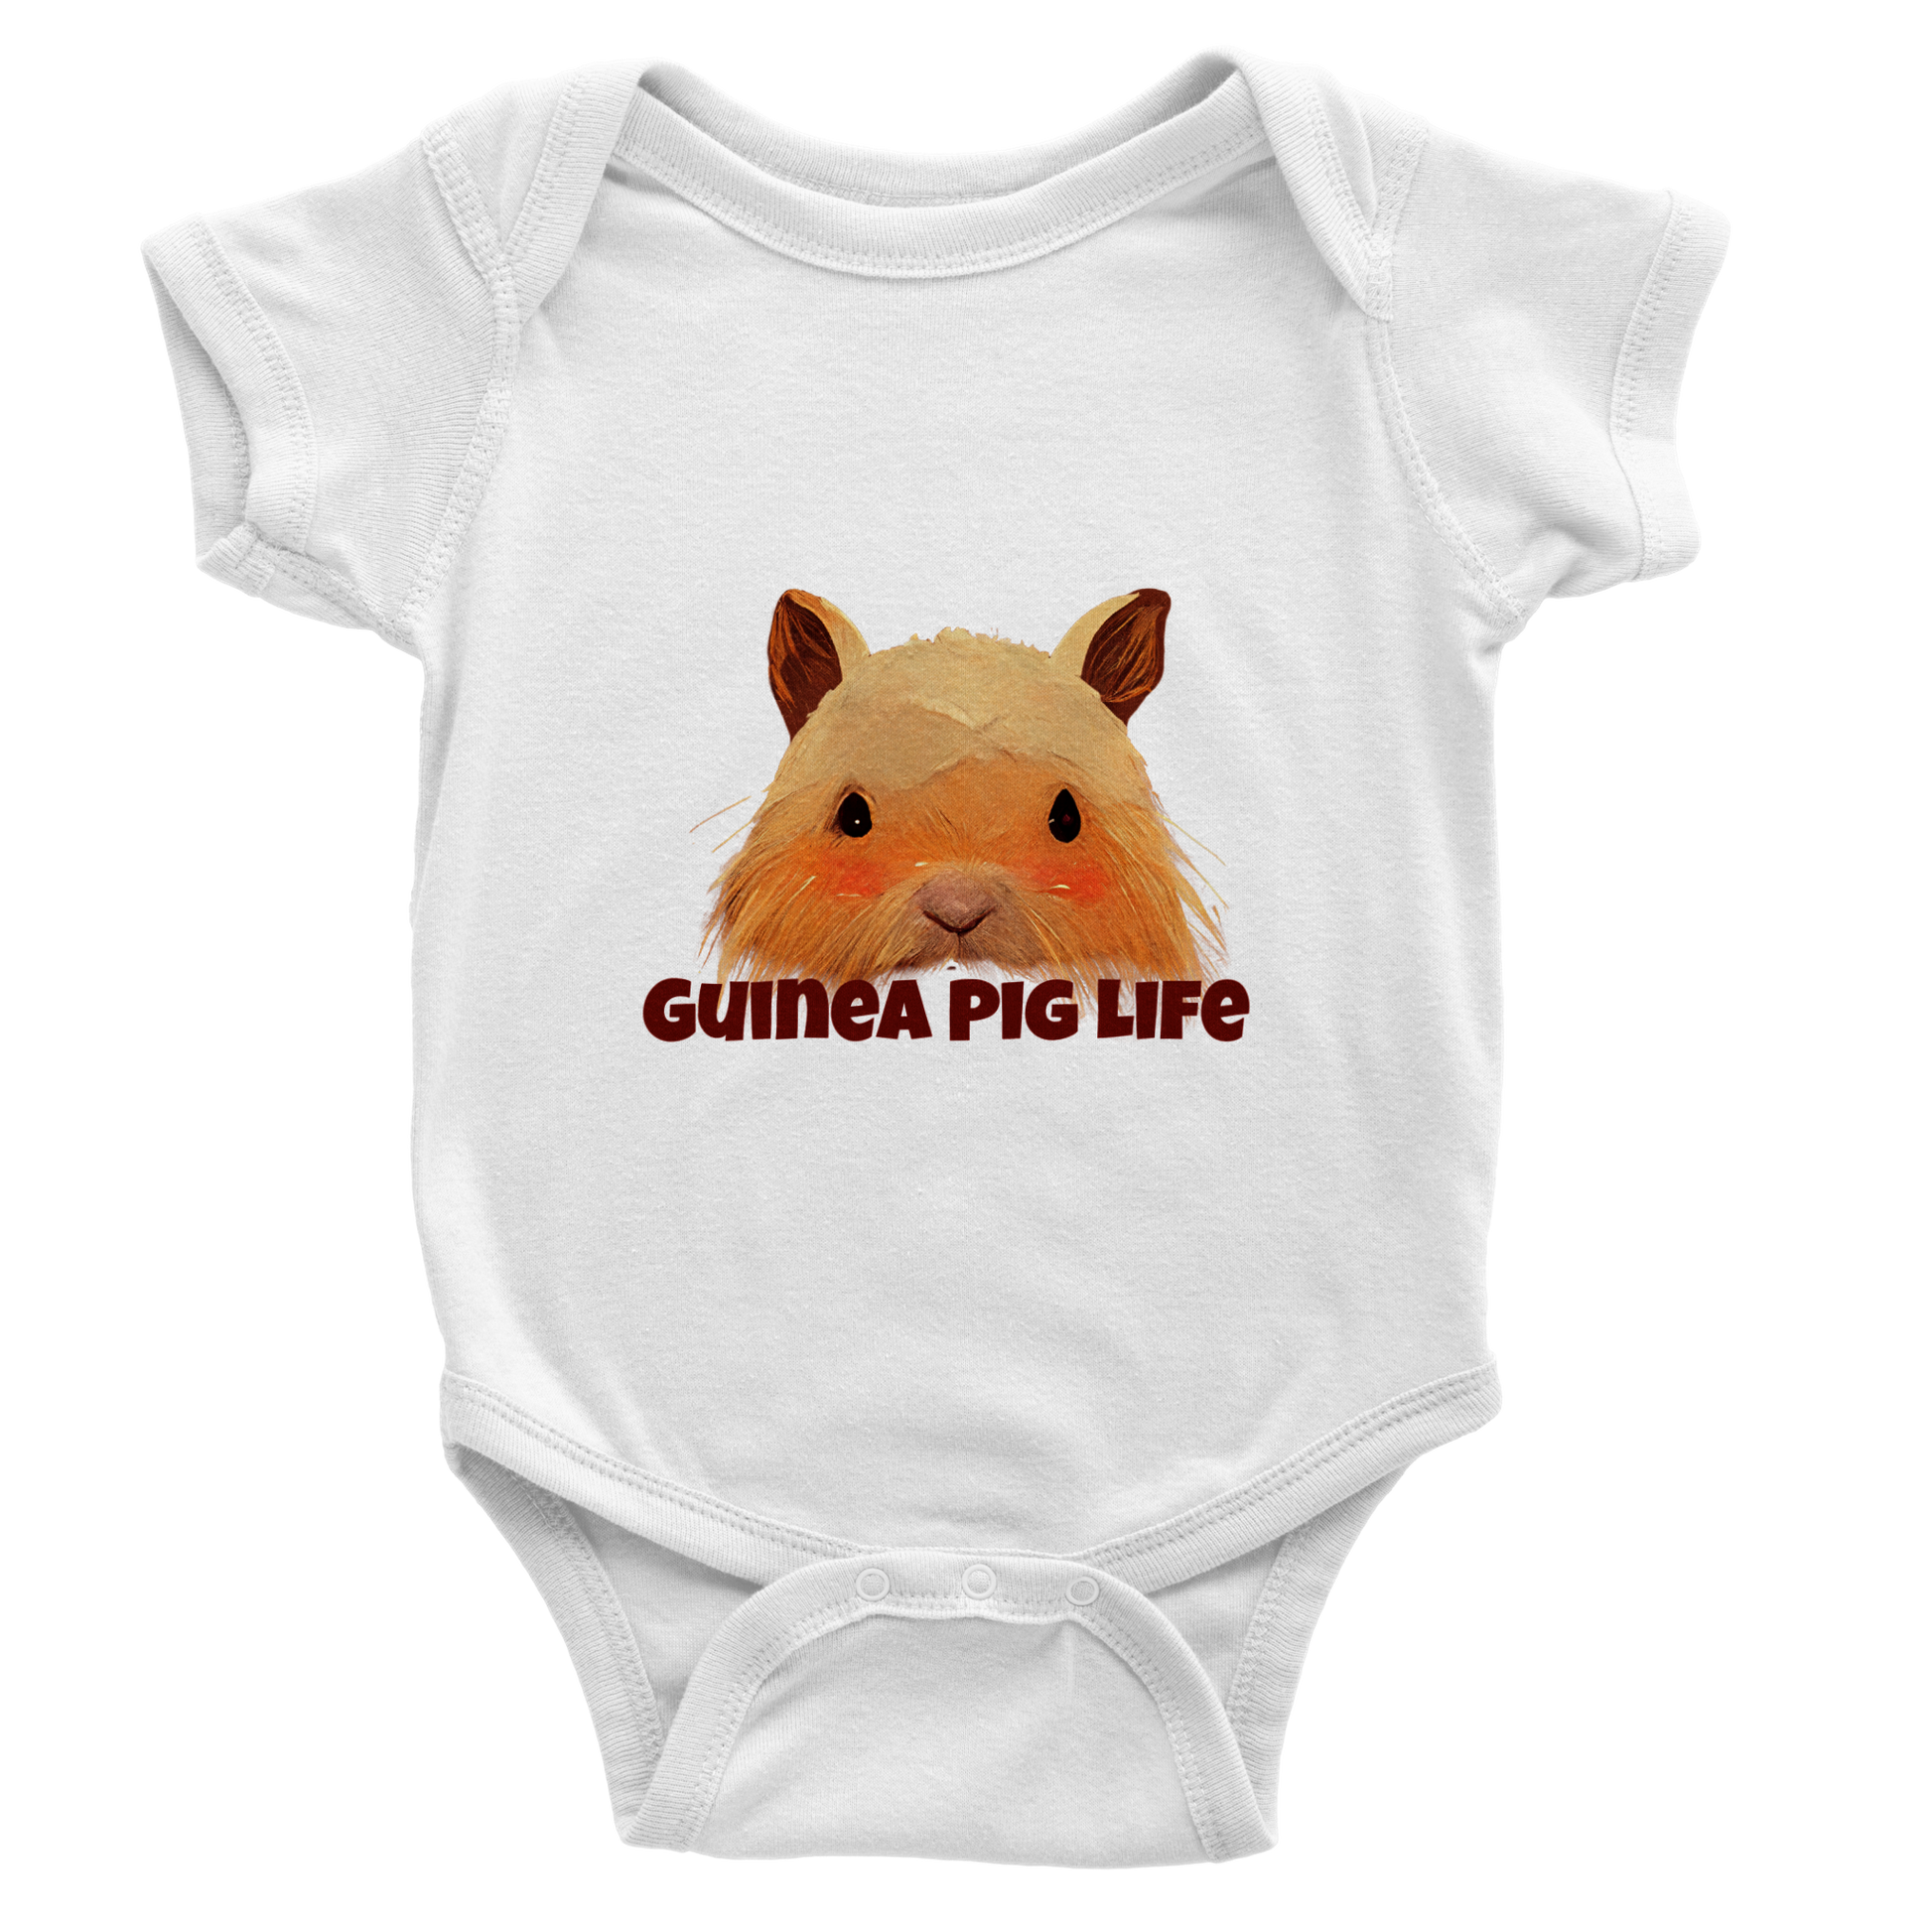 White short sleeve baby onesie with cute Guinea Pig life print